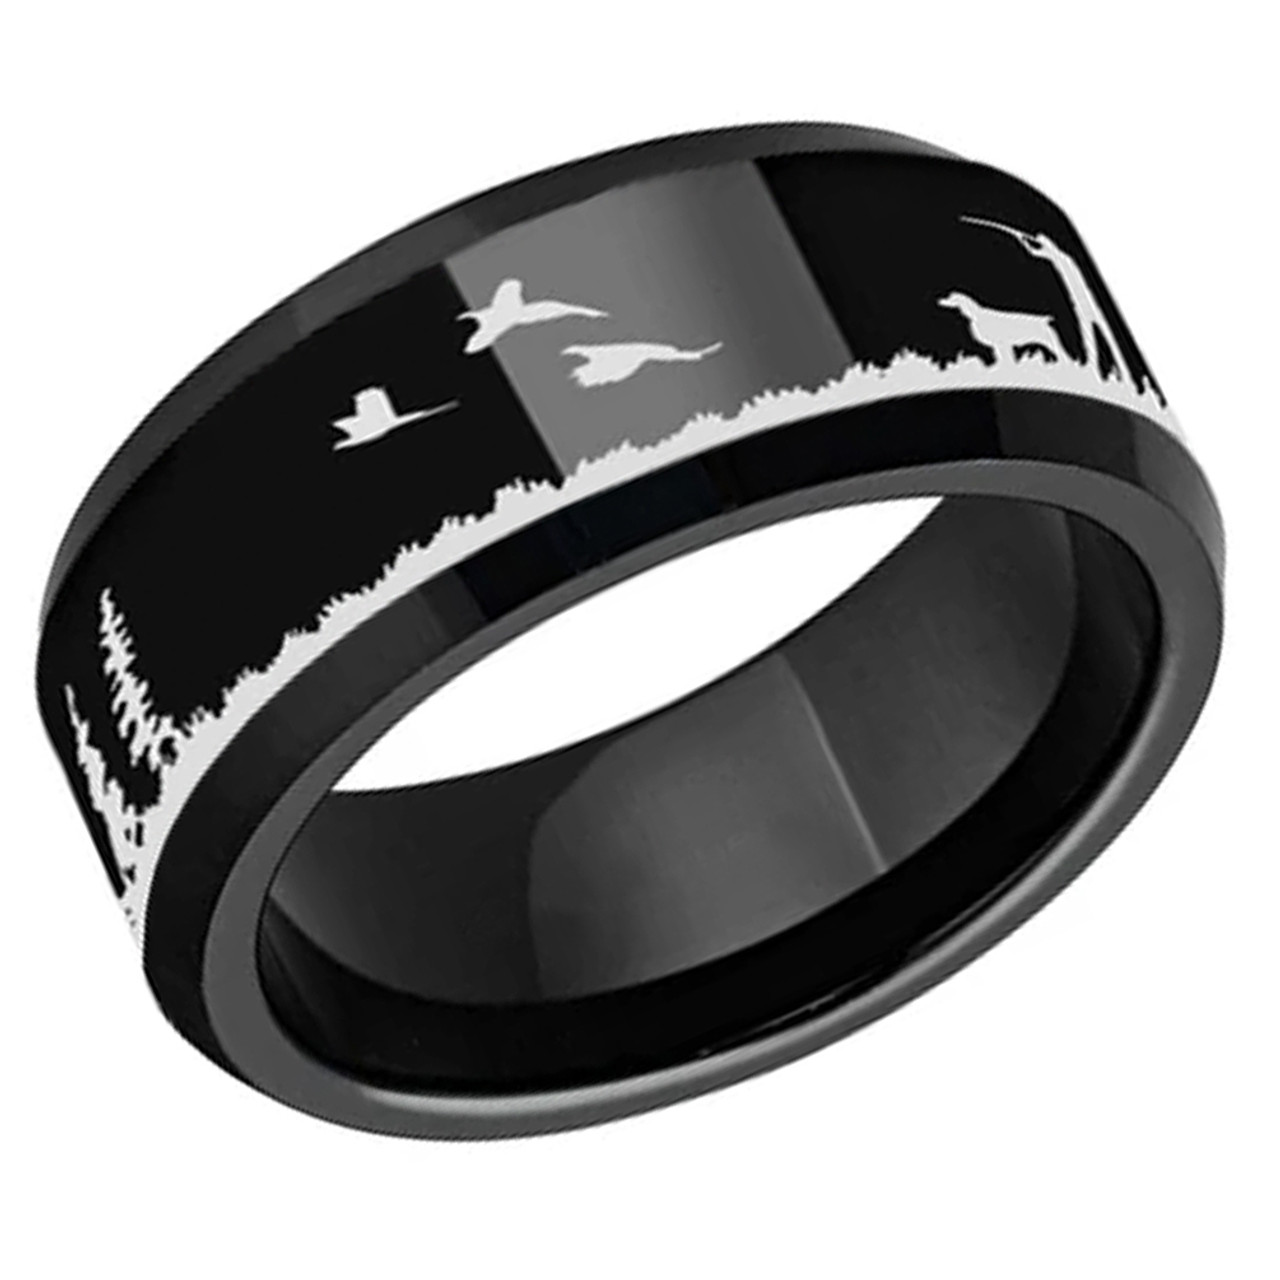 Men's Hunting Ring - Bird / Duck Hunting Wedding Band (8mm). Black Tungsten Carbide Band with Etched Silhouette. Hunter's Wedding Band Comfort Fit Ring